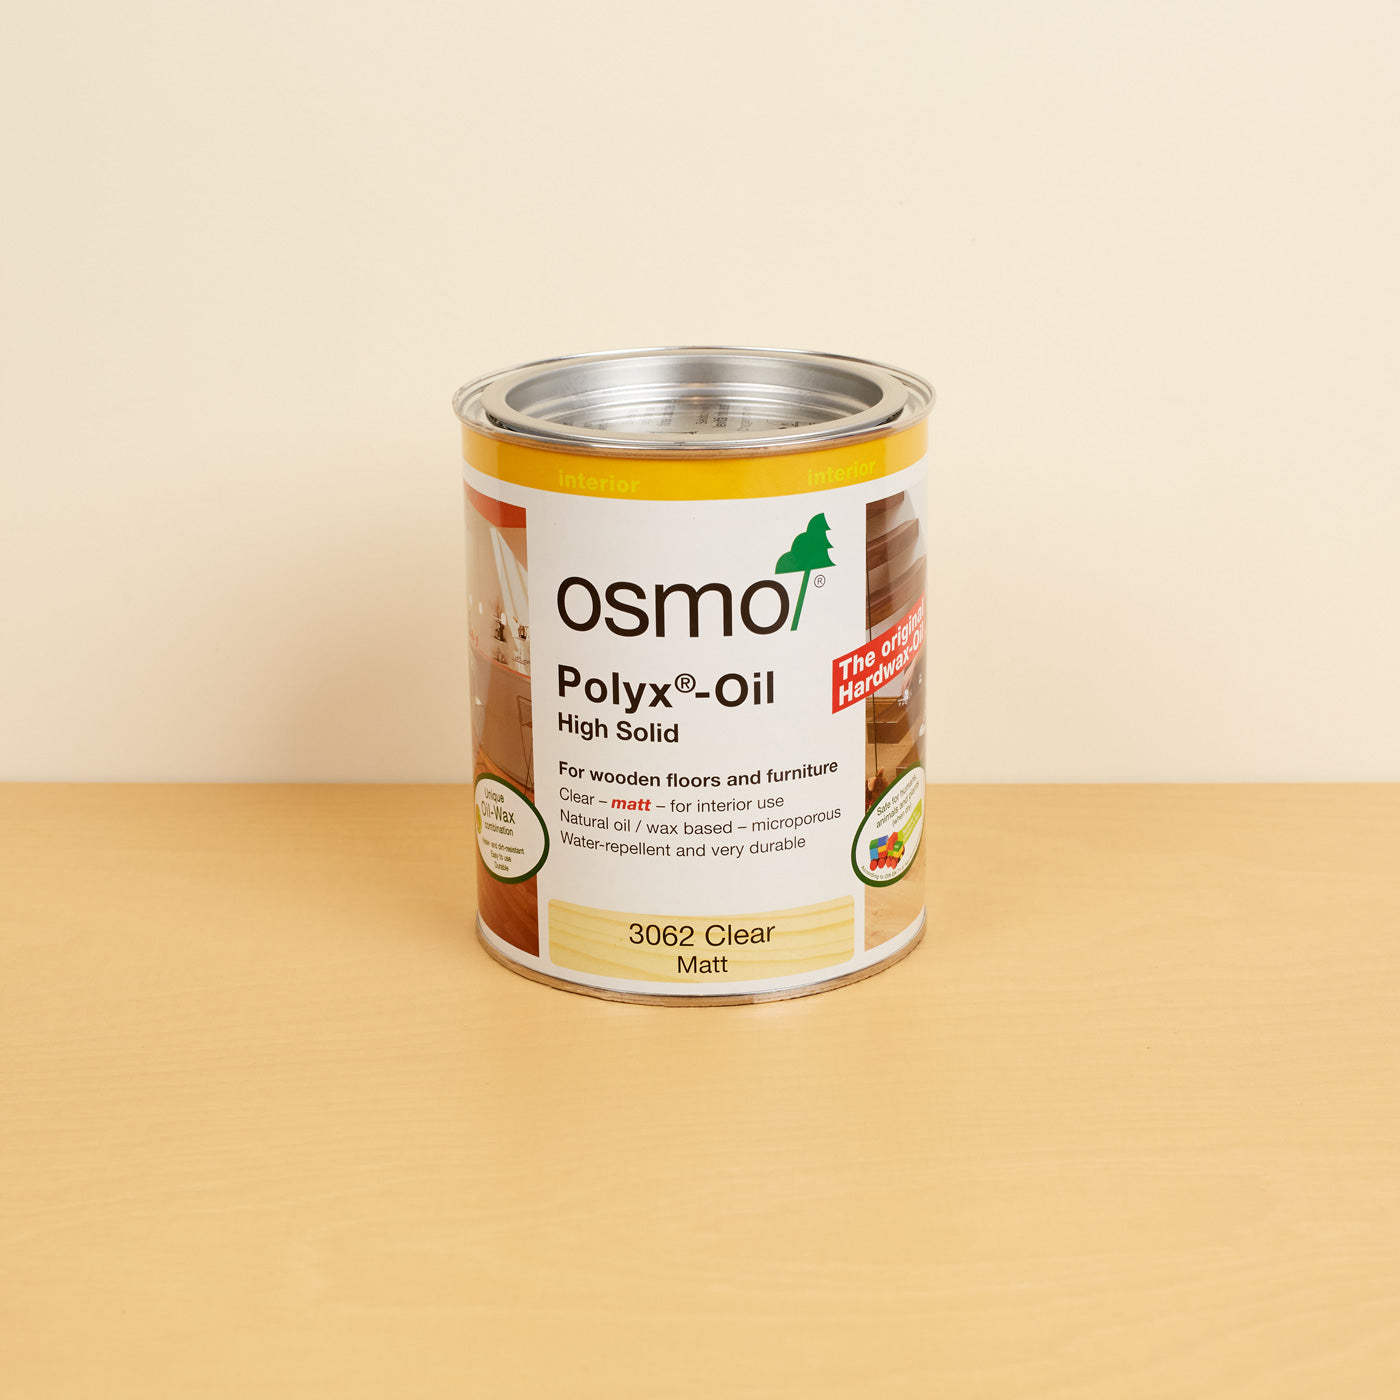 OSMO POLYX®-OIL HIGH SOLID